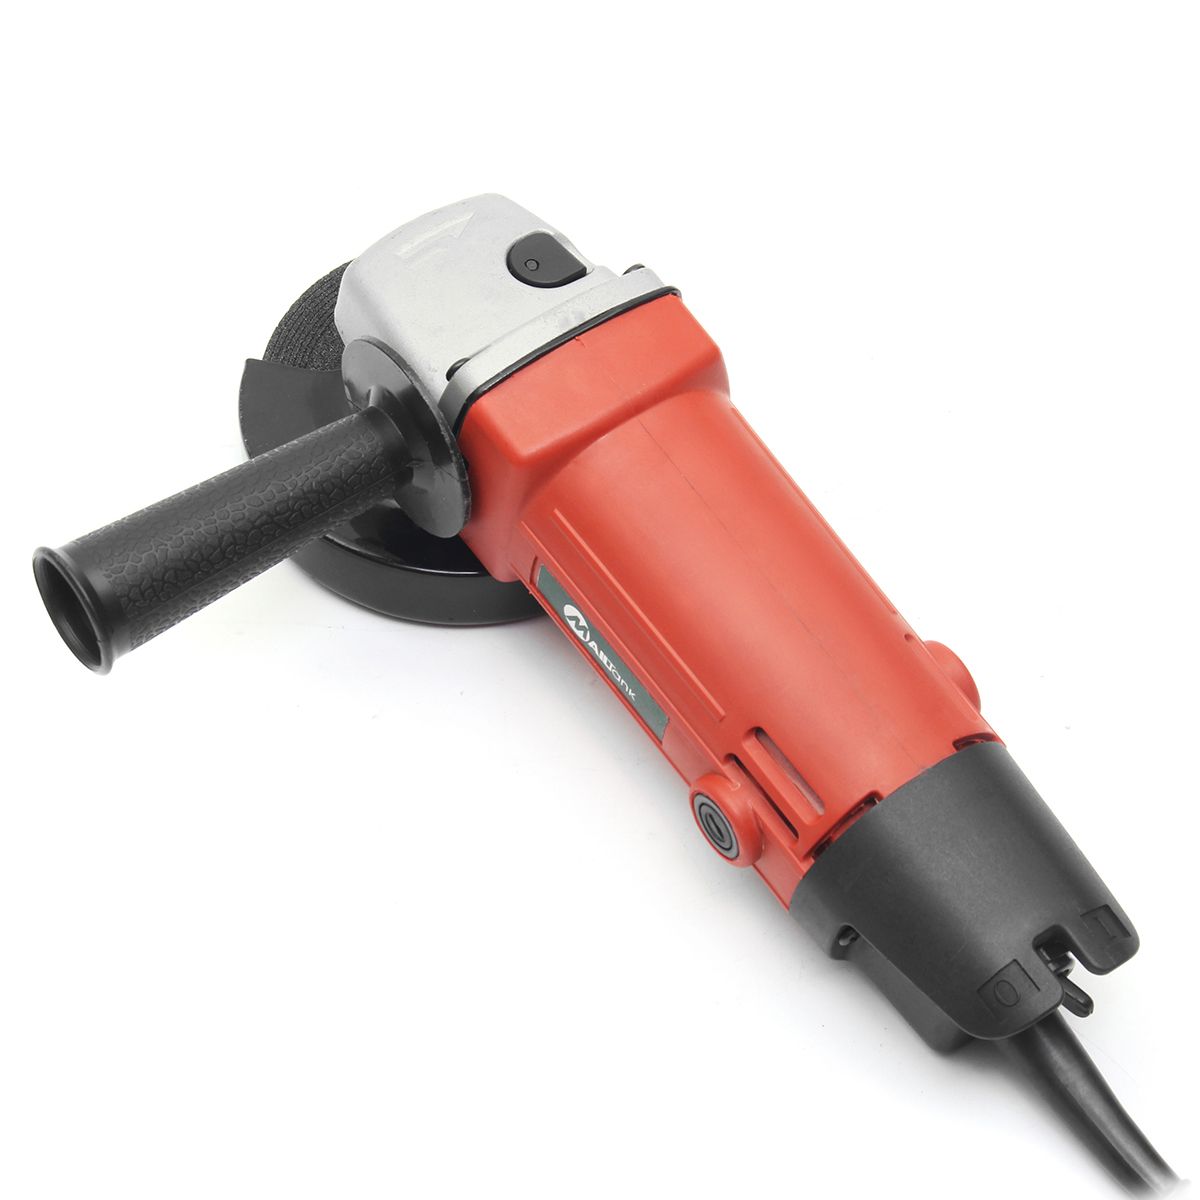 220V-600W-Multifunctional-Electric-Angle-Grinder-Polishing-Machine-Metal-Grinding-Cutter-Tool-1292095